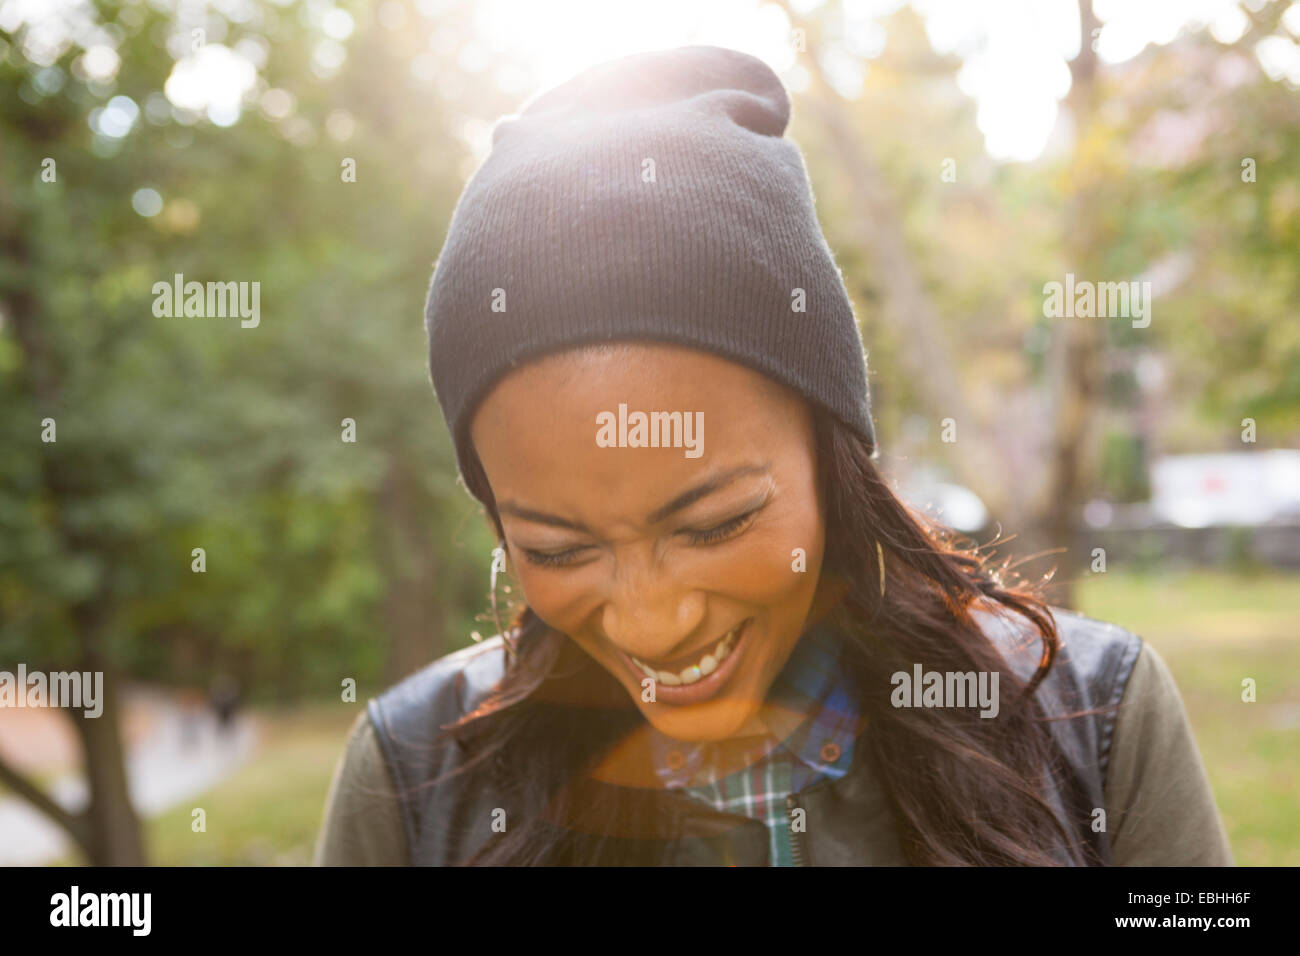 Young woman laughing in park Stock Photo